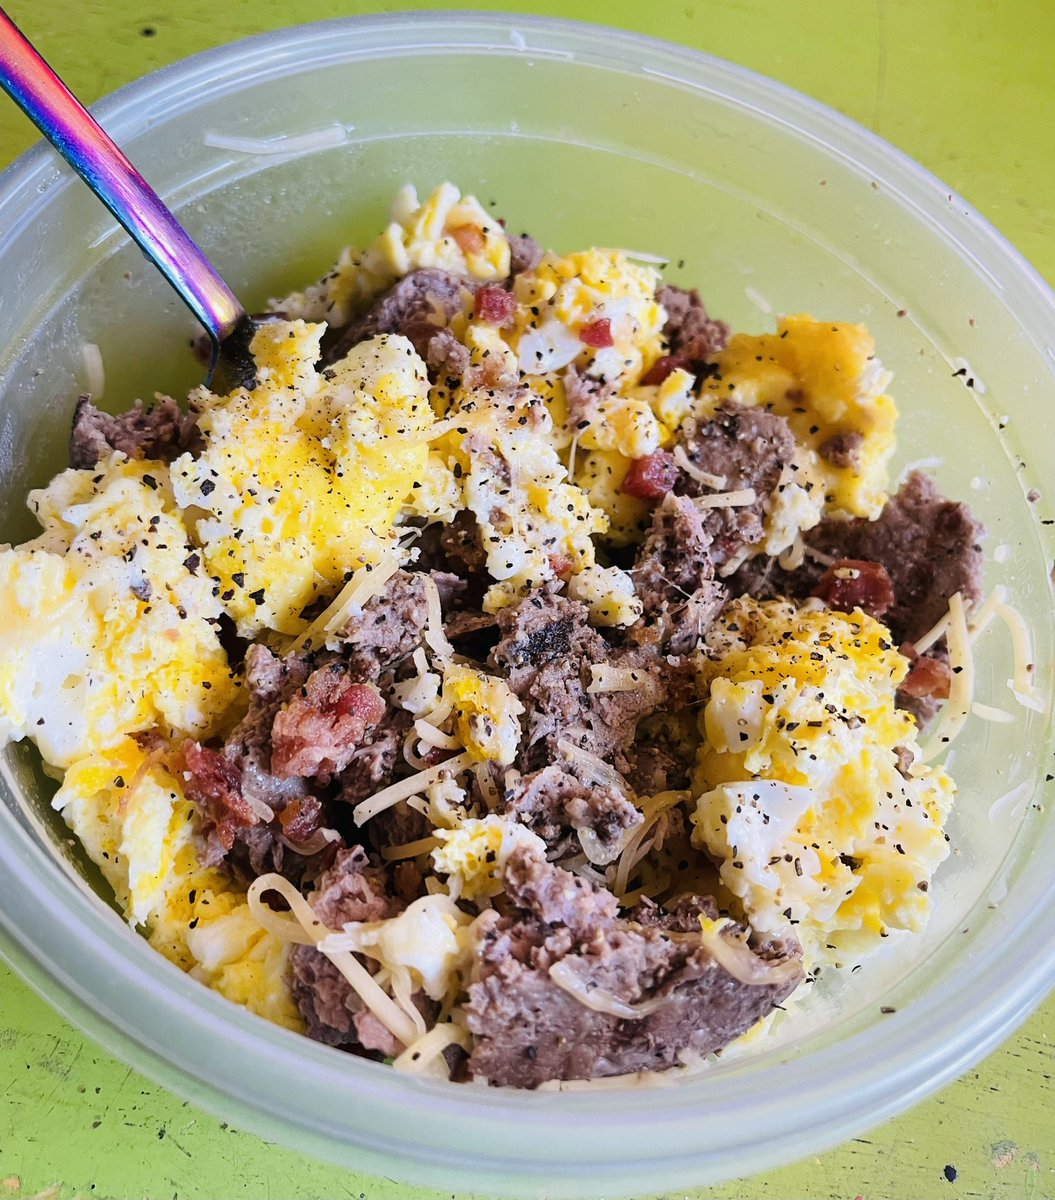 Start of Day 7️⃣4️⃣ (5.14.24): Broke my #fast at 5pm w/ a #protein bowl. 3 eggs, scrambled. 1/2lb beef patty chopped, 1/2 cup gouda, & topped w/ “real” bacon bits. #animalbasedprotein #animalbasednutrition #meat #meatlovers #carnivorewomen  #carnivoreclub #carnivore 
#weightloss